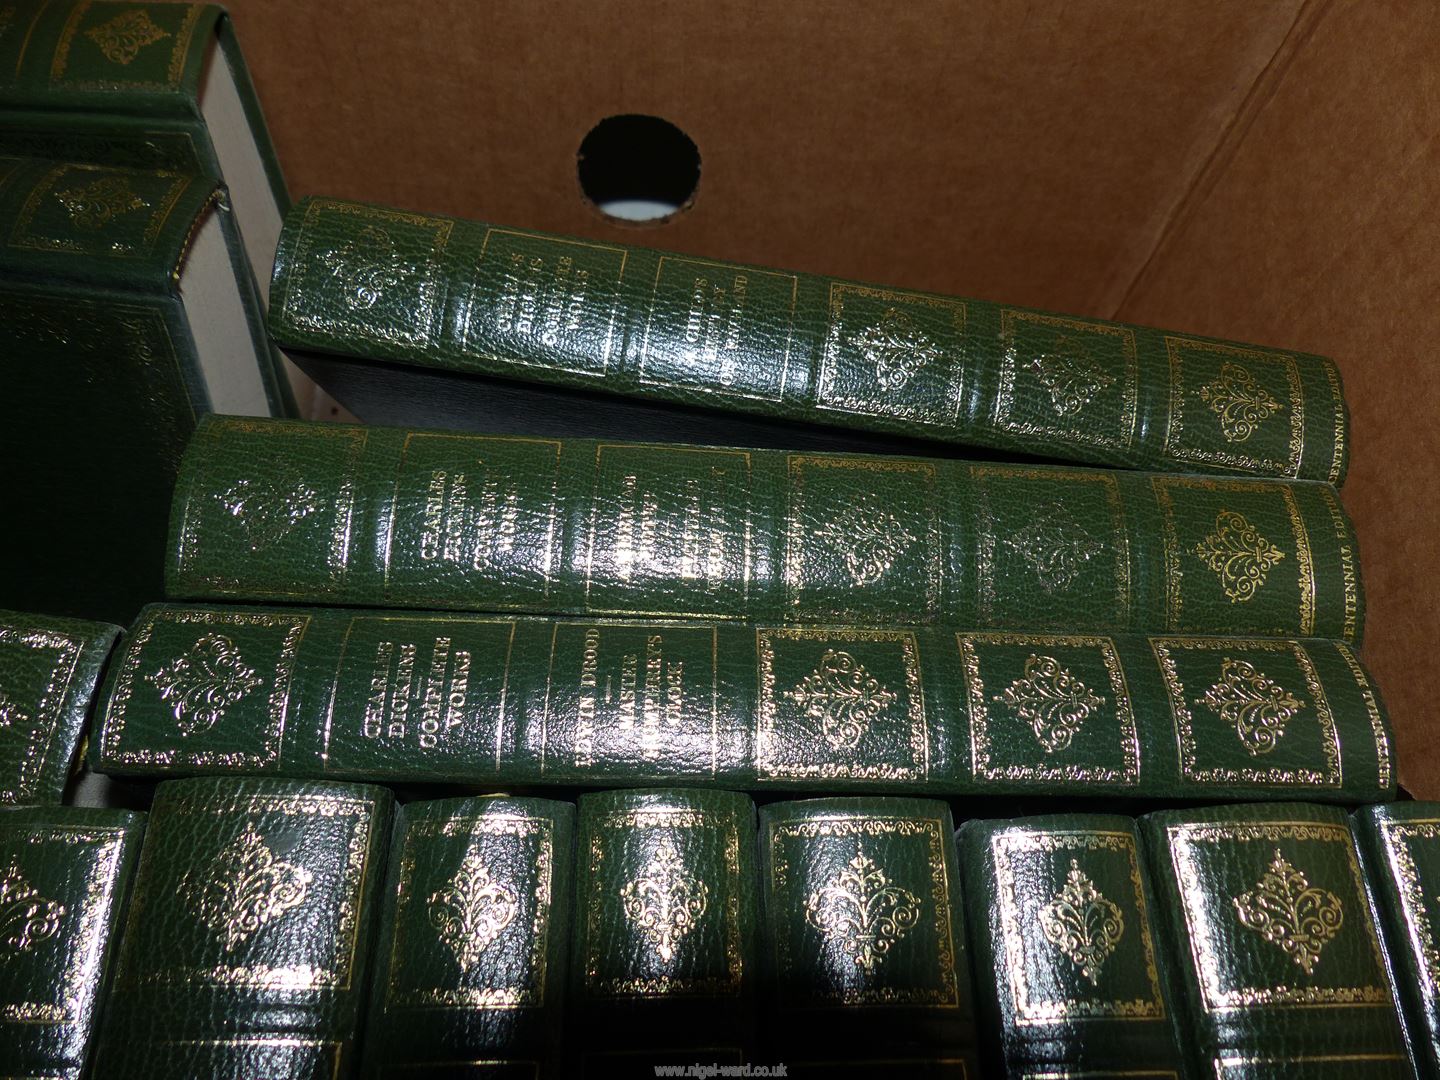 The complete works of Charles Dickens distributed by Heron Books - Centennial Edition. - Image 4 of 5